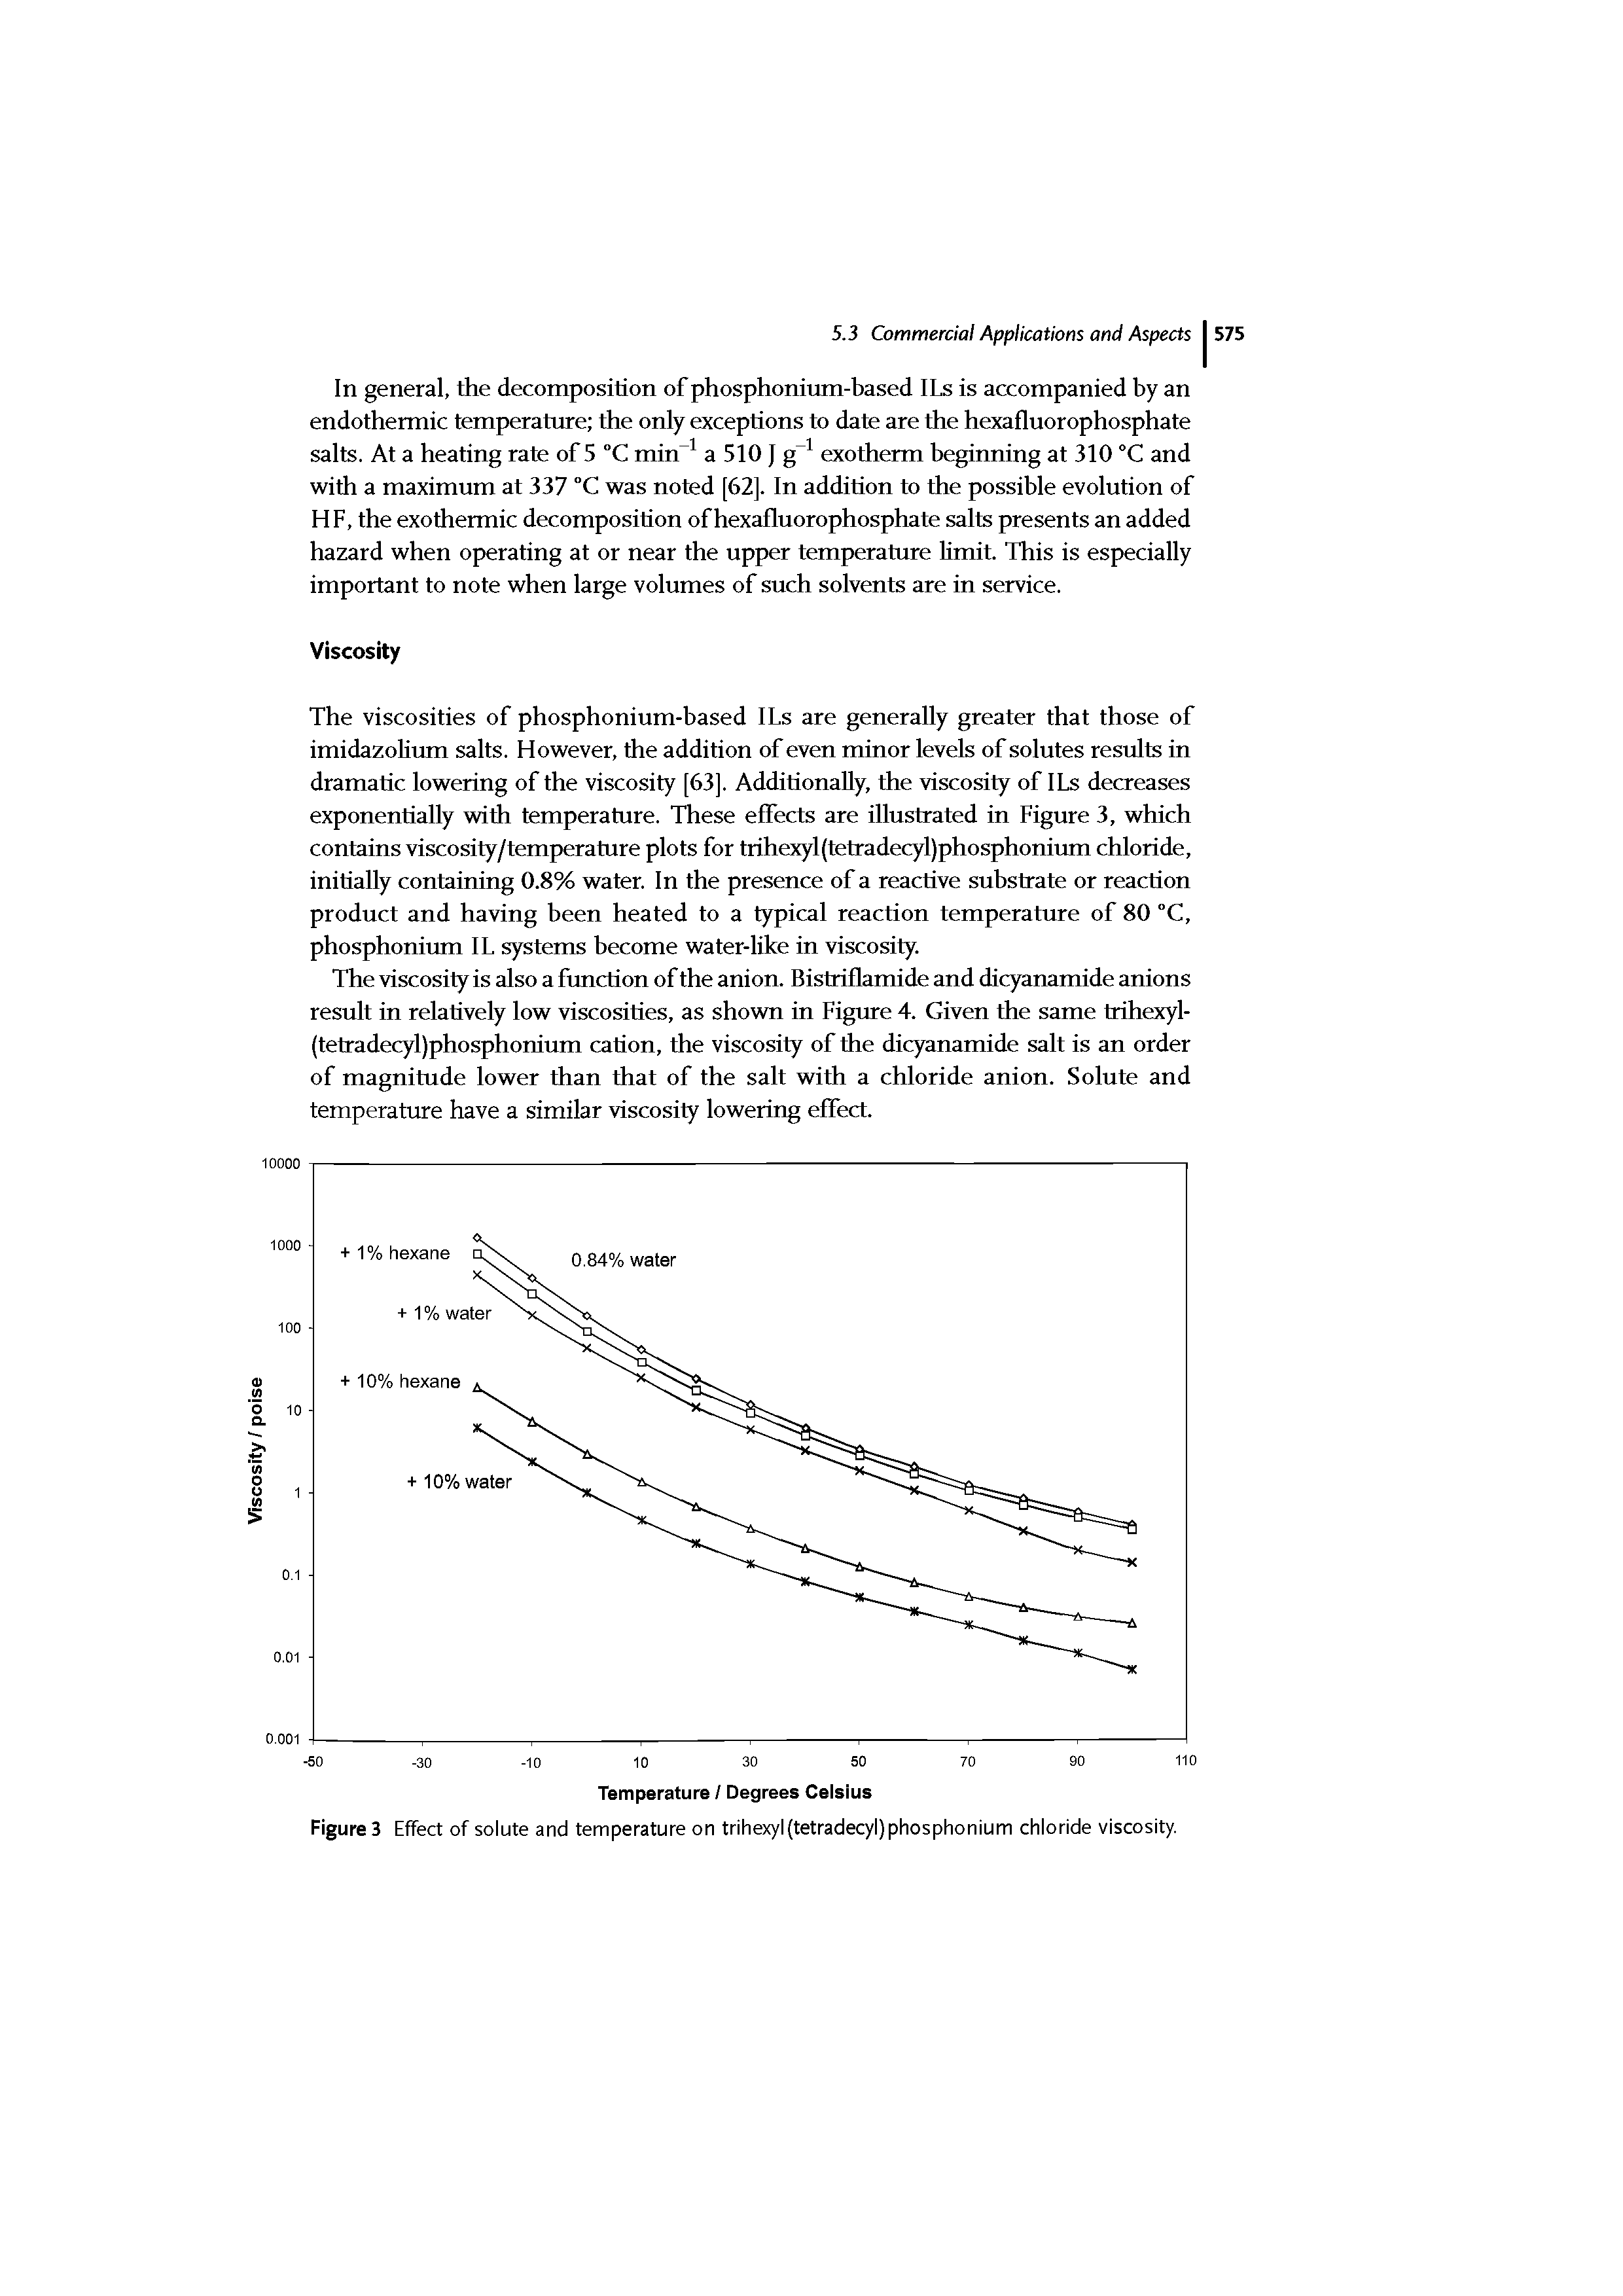 Figures Effect of solute and temperature on trihexyl (tetradecyl) phosphonium chloride viscosity.